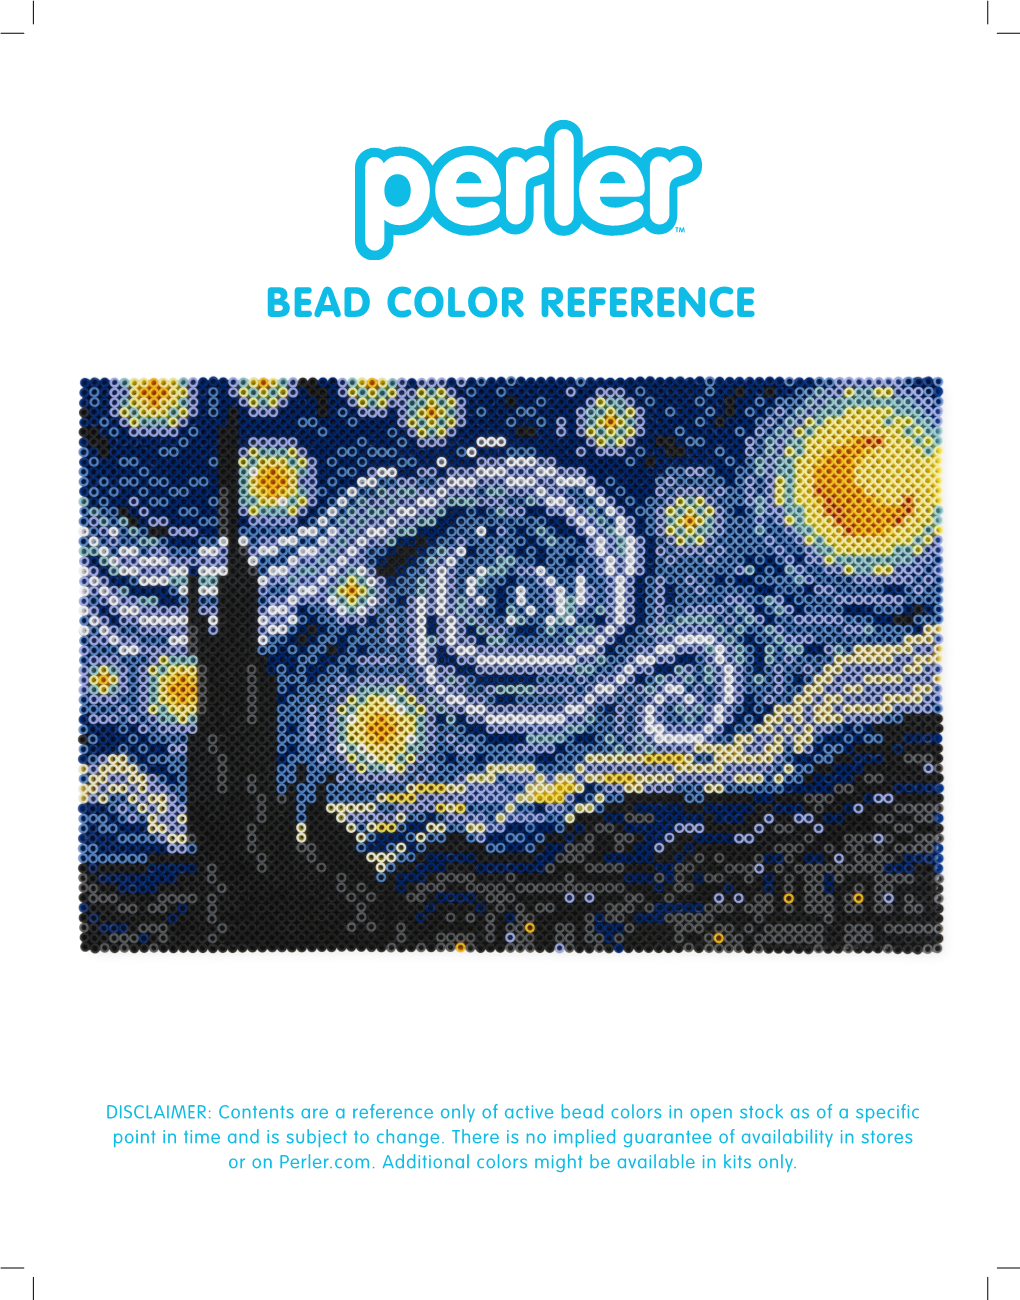 Bead Color Reference